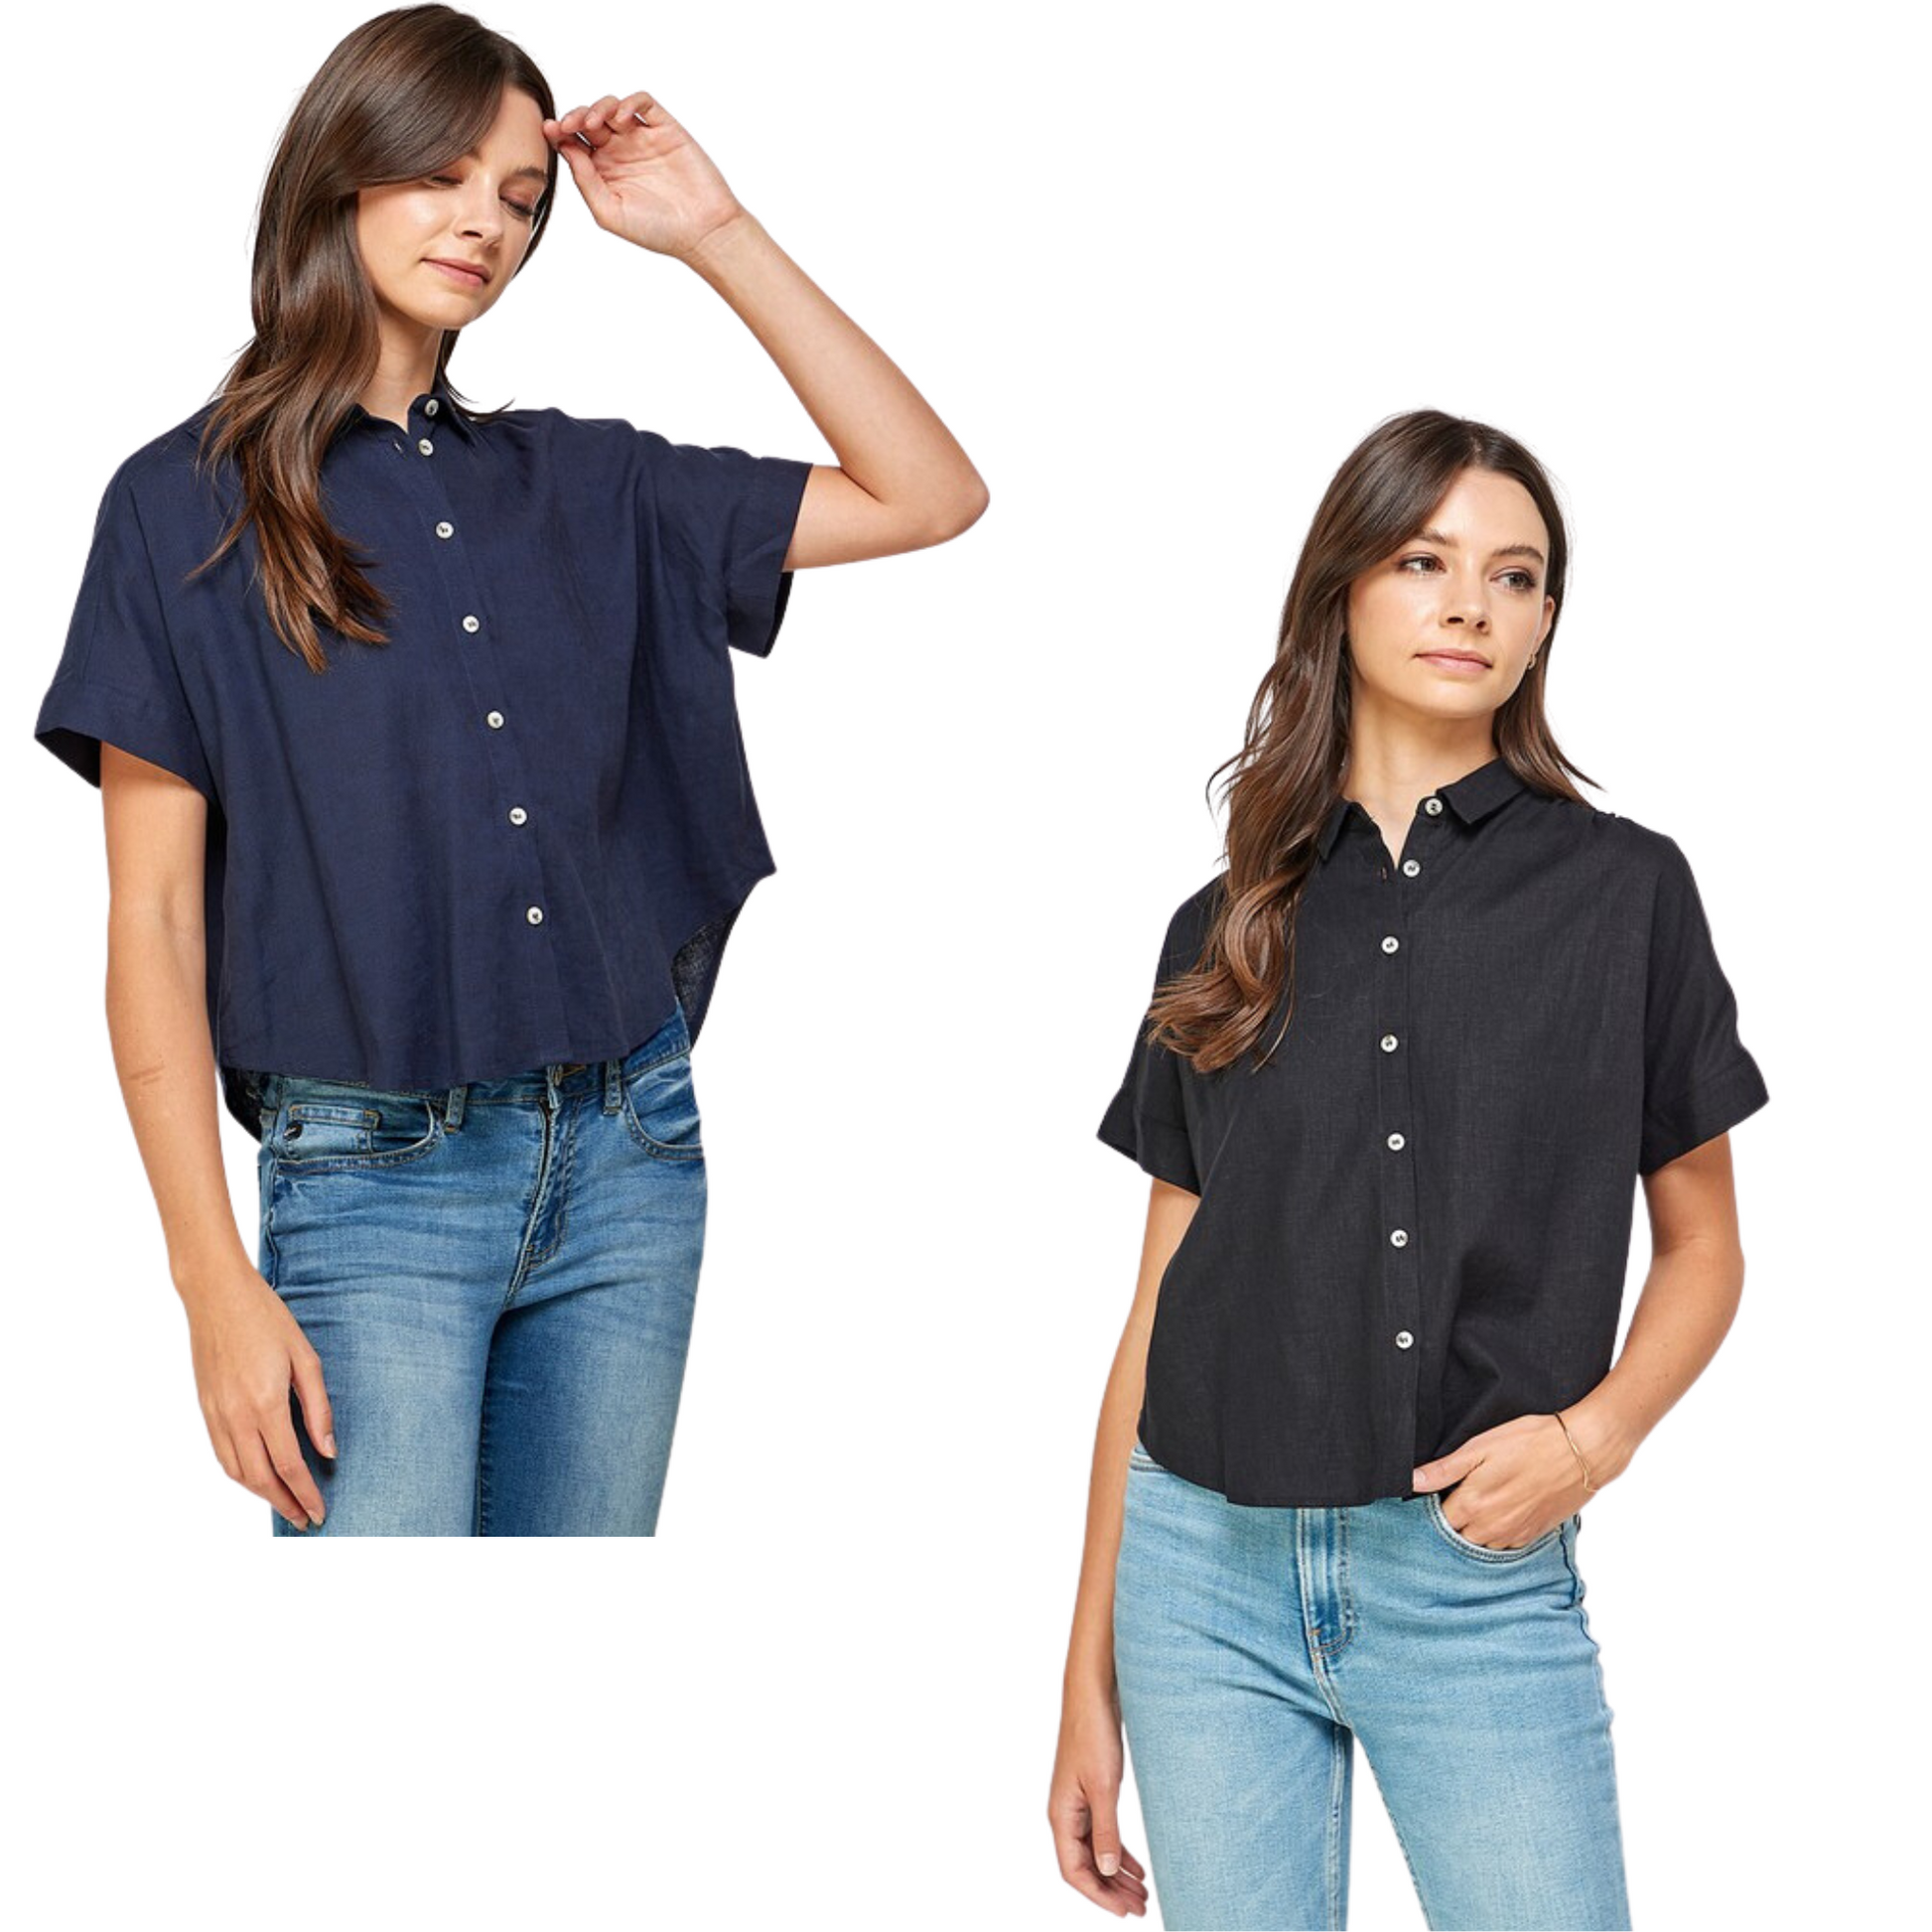 This button-down top is designed to provide a classic, timeless look. With two color options--navy or black--you're sure to find the perfect fit for your wardrobe. The simple yet elegant design is perfect for any occasion.